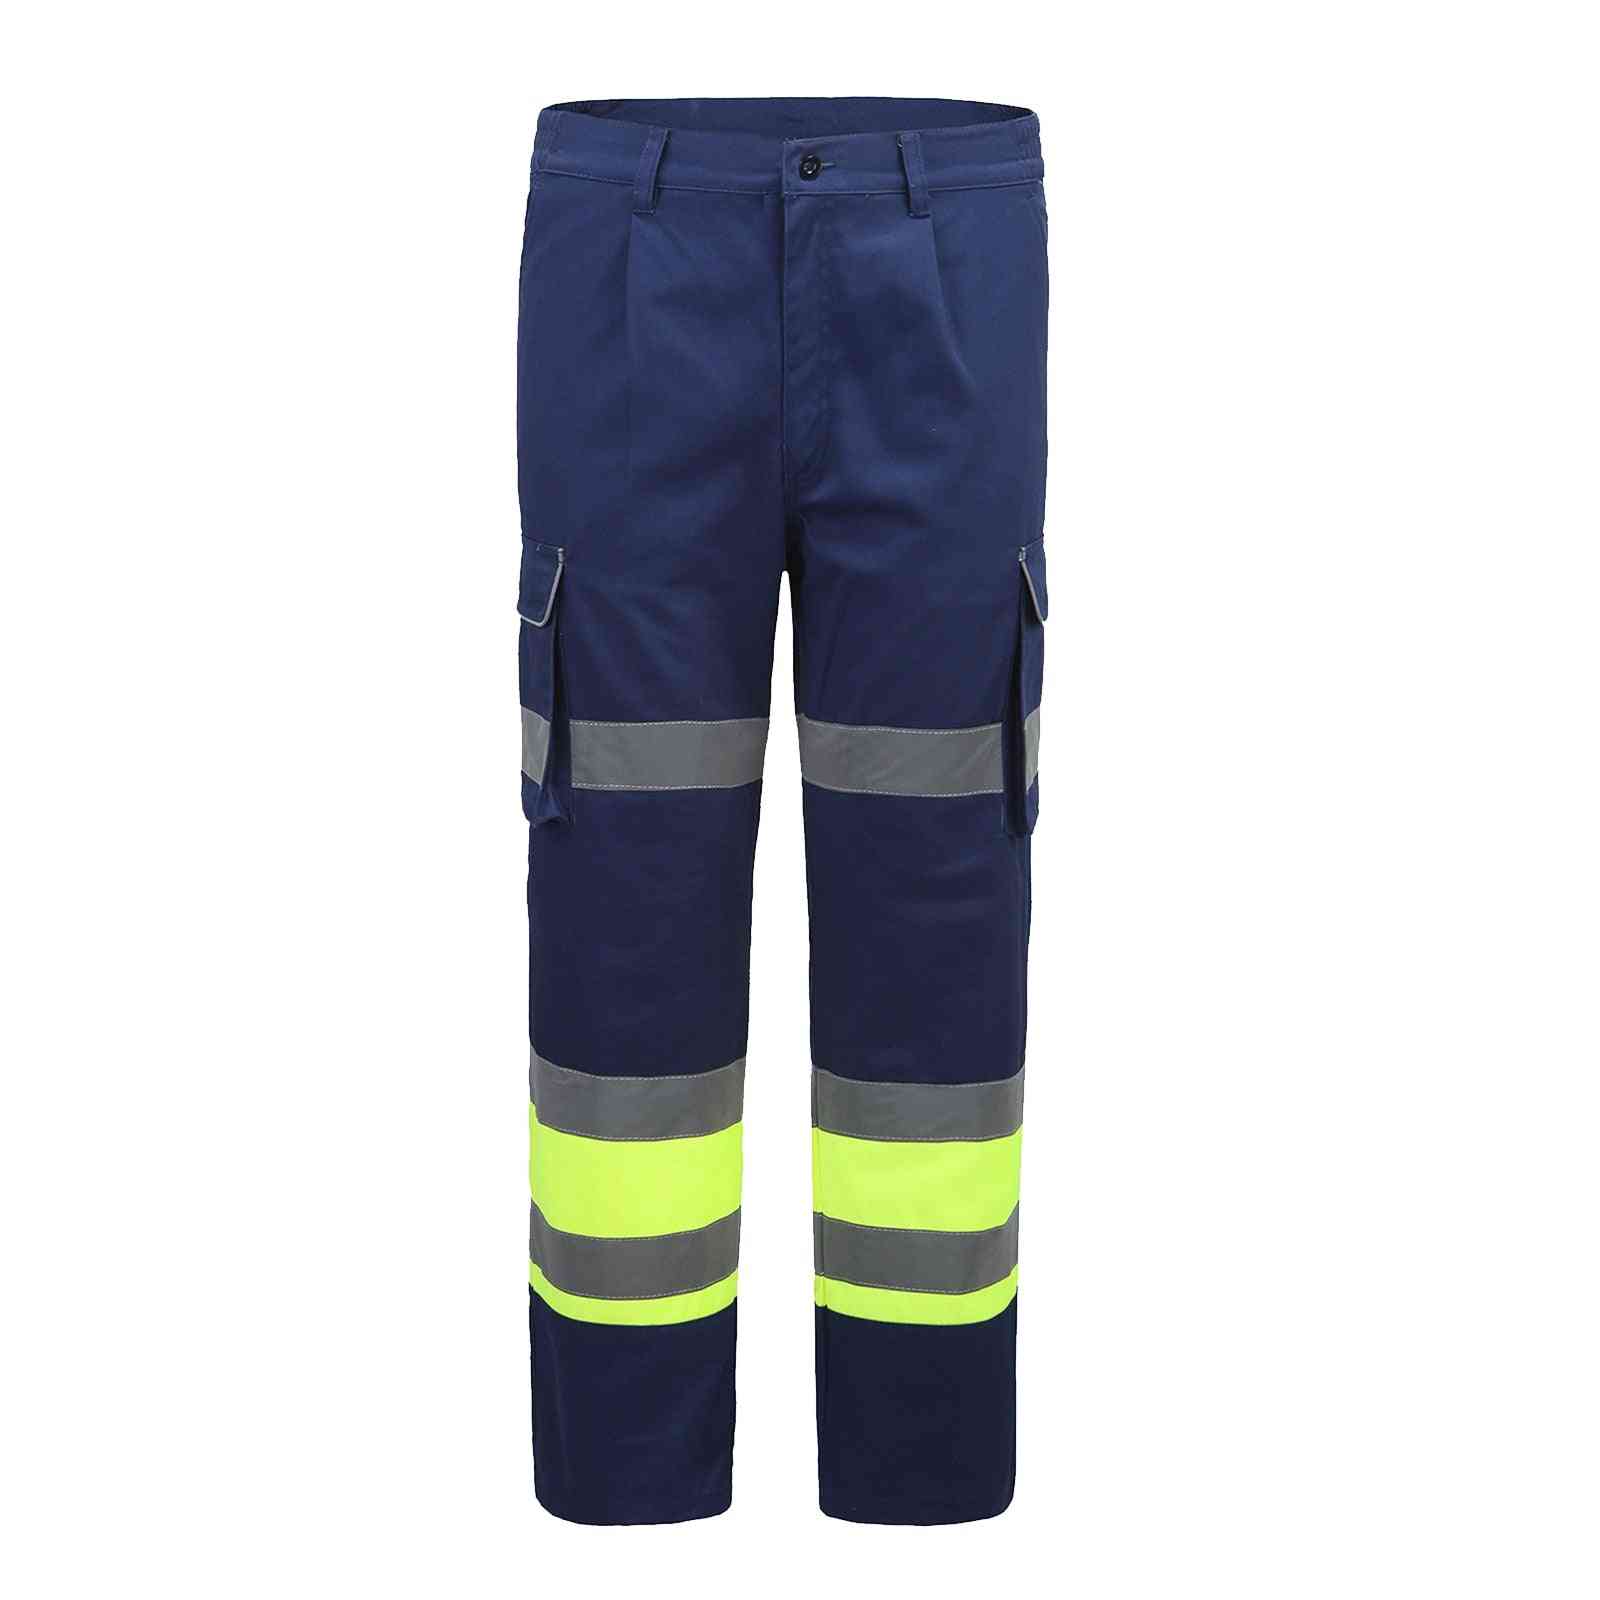 Functional Pockets Wear-resistance Safety Trousers